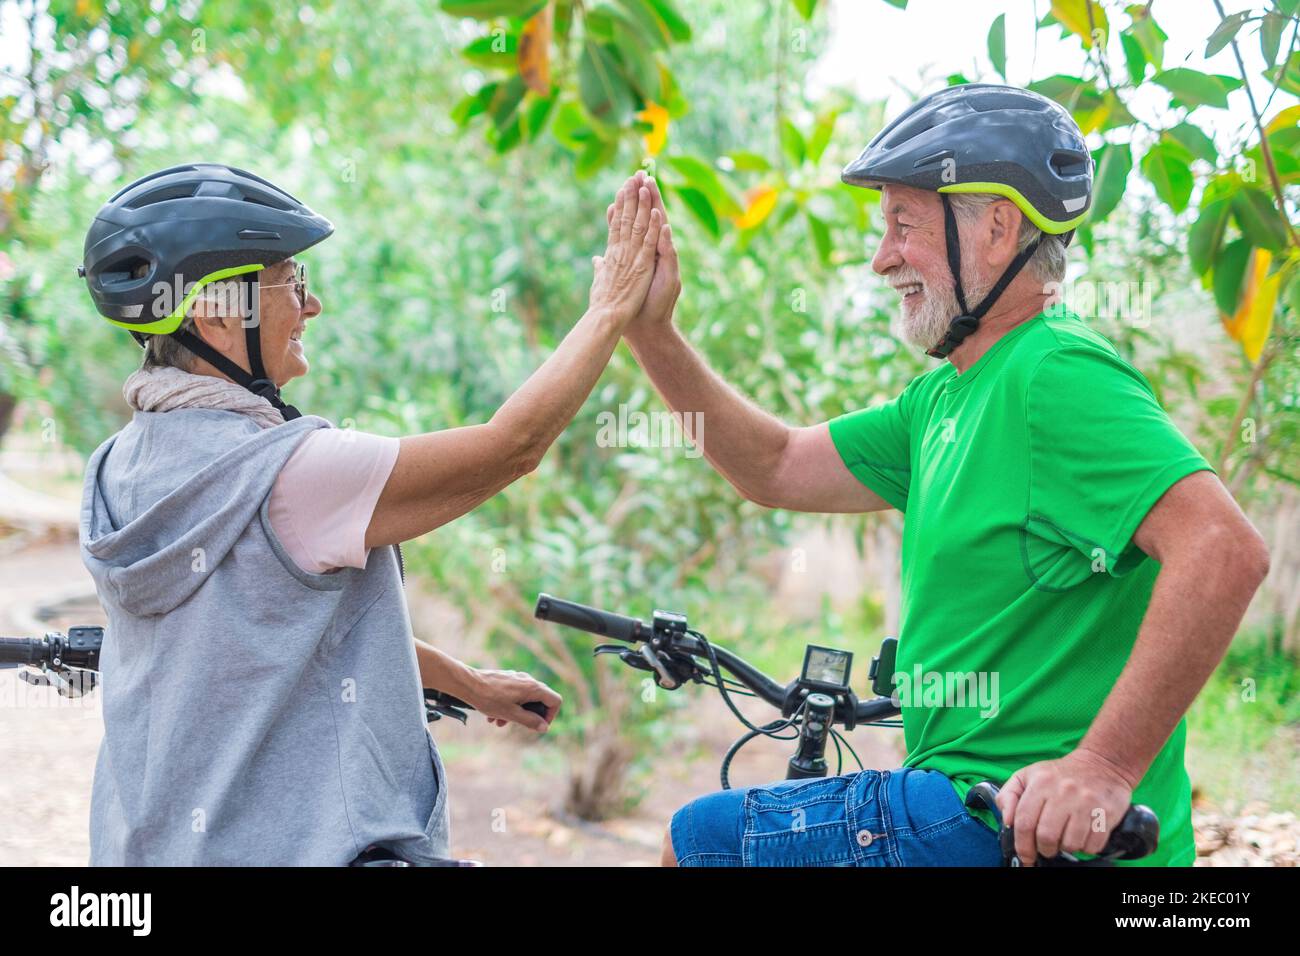 Couple of two seniors giving five together outdoors having fun with bicycles enjoying nature. Couple of old people building a healthy and fit lifestyle. Stock Photo